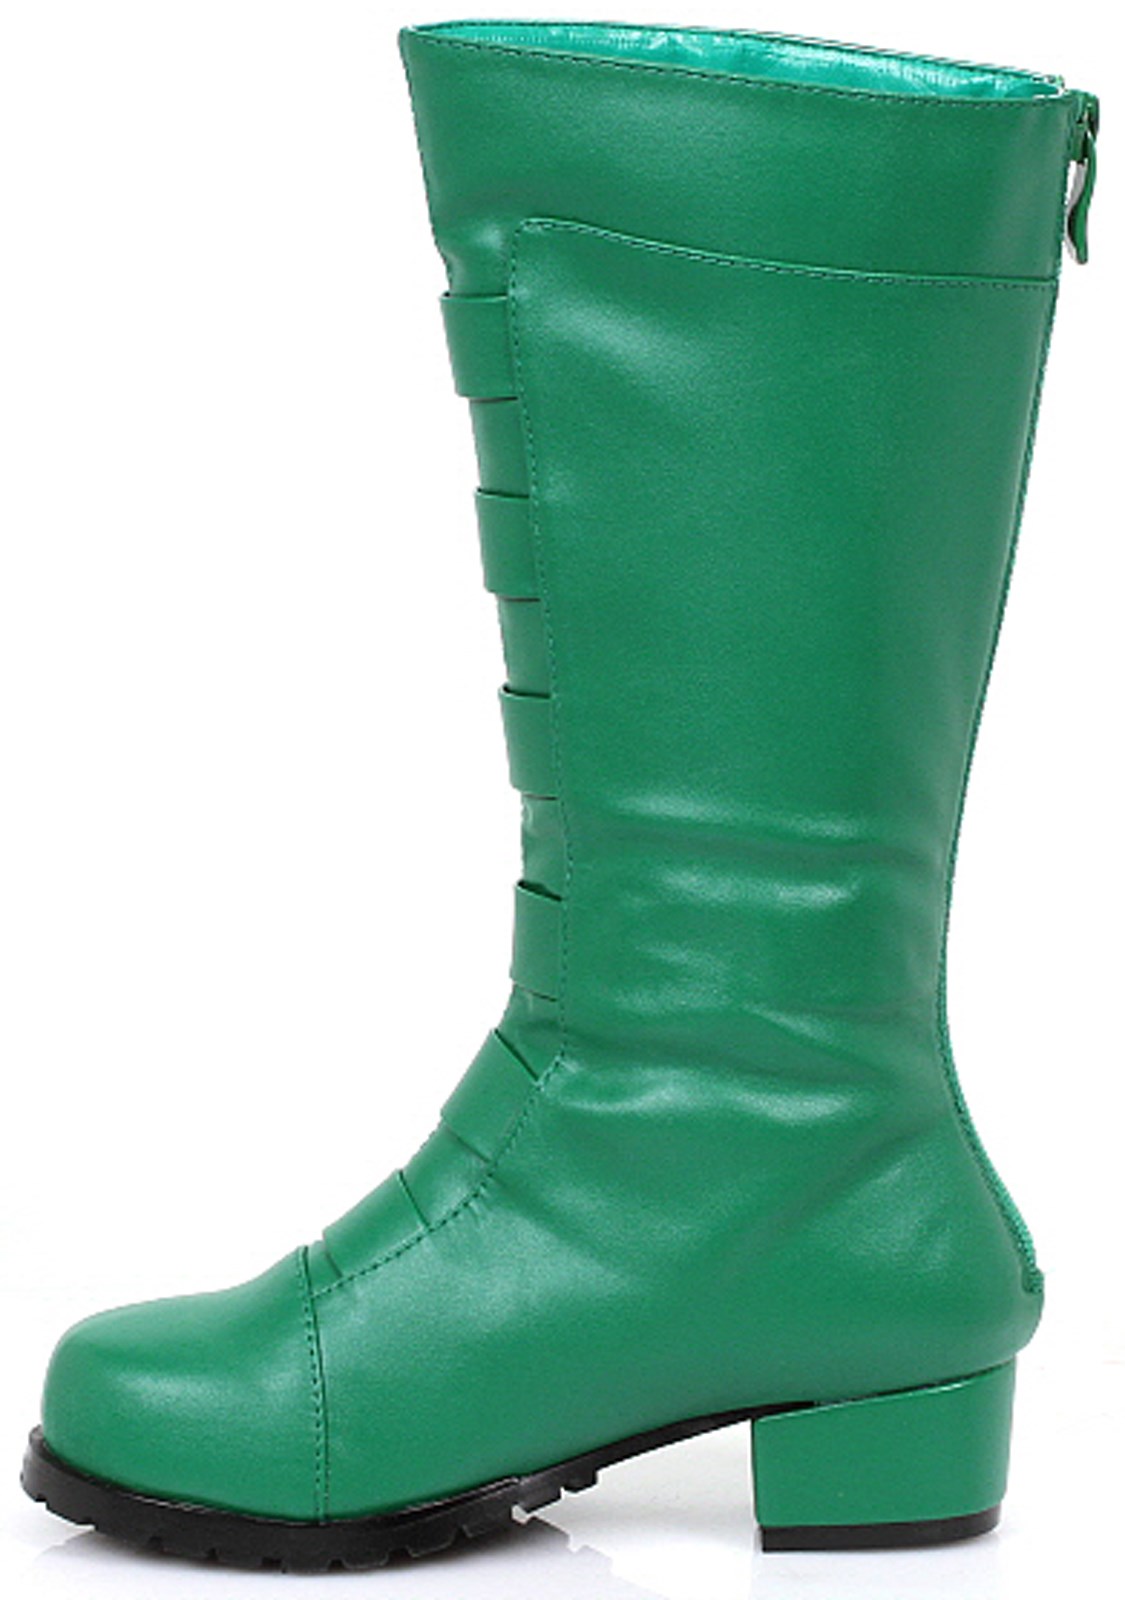 Boys Green Costume Boots